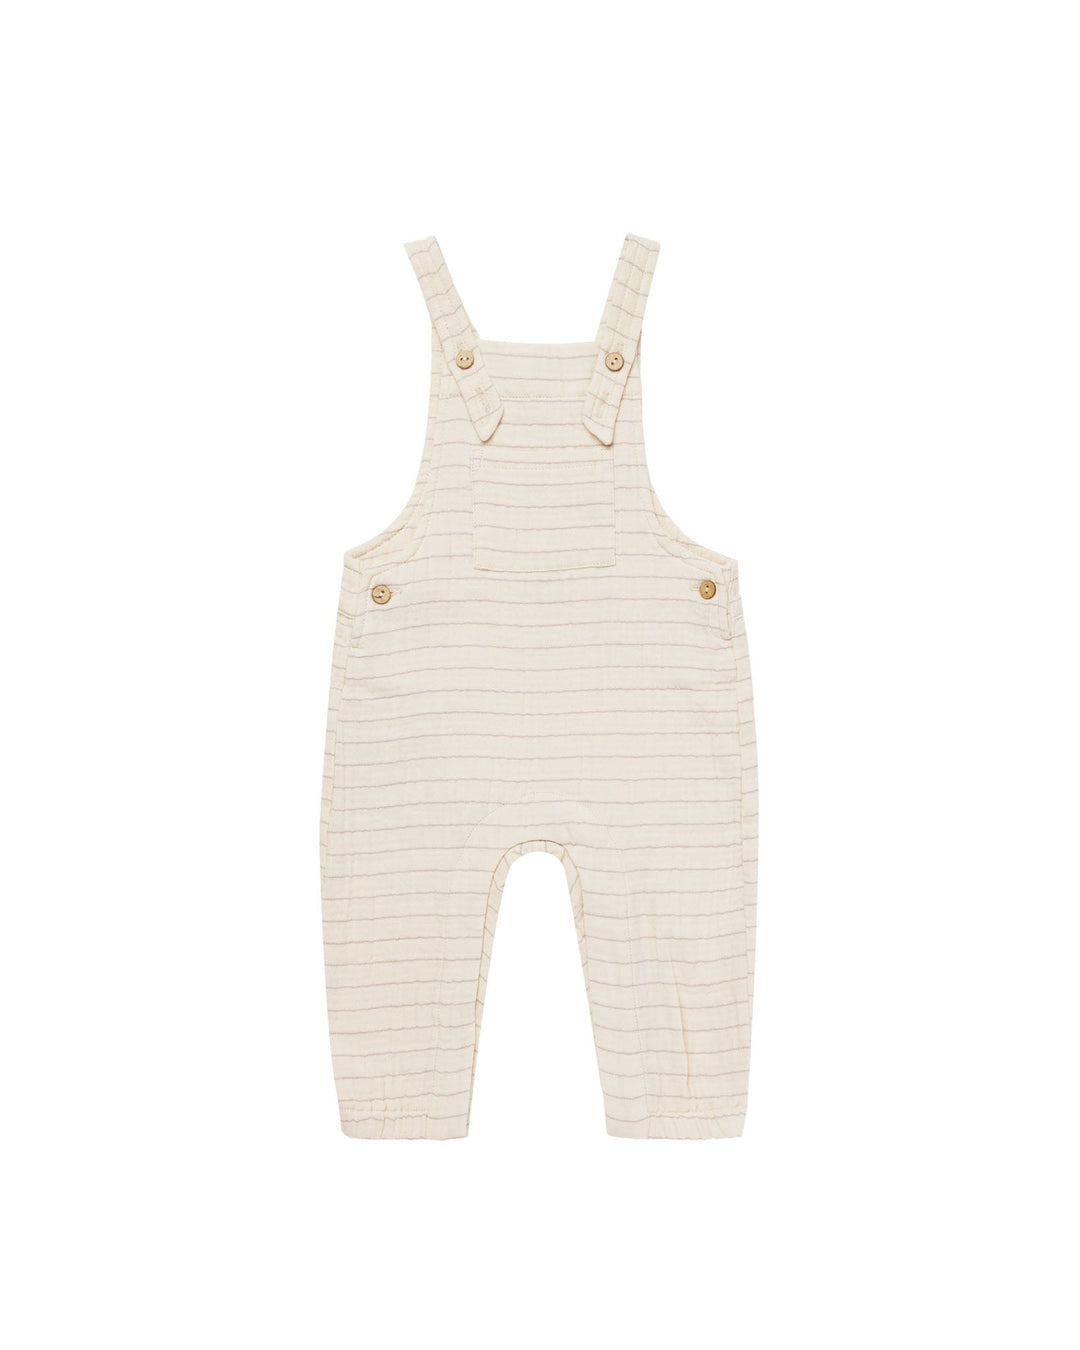 Quincy Mae Overall Baby Overall - Vintage Stripe